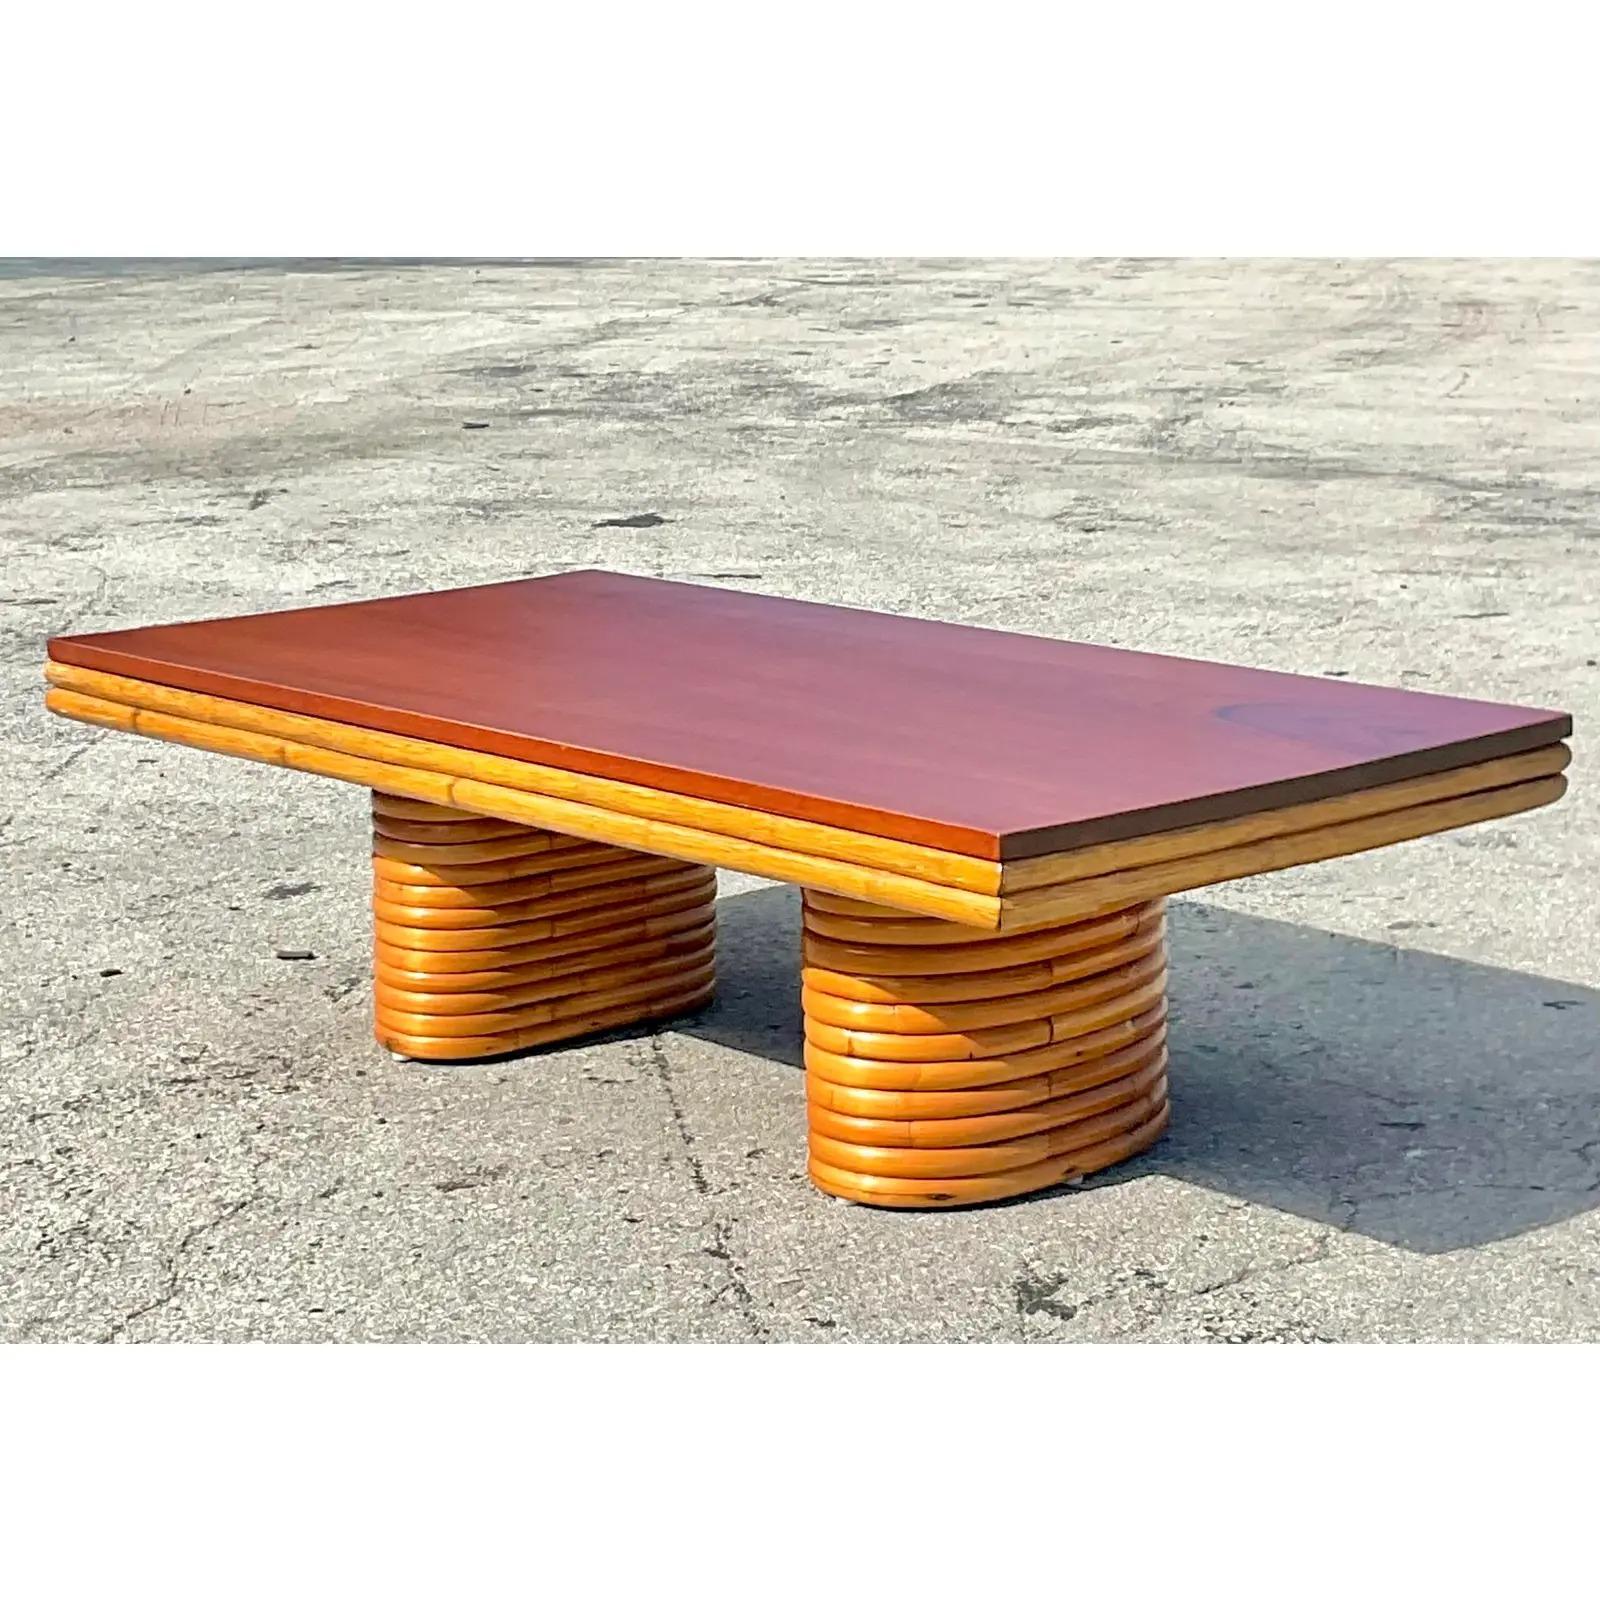 paul frankl coffee table